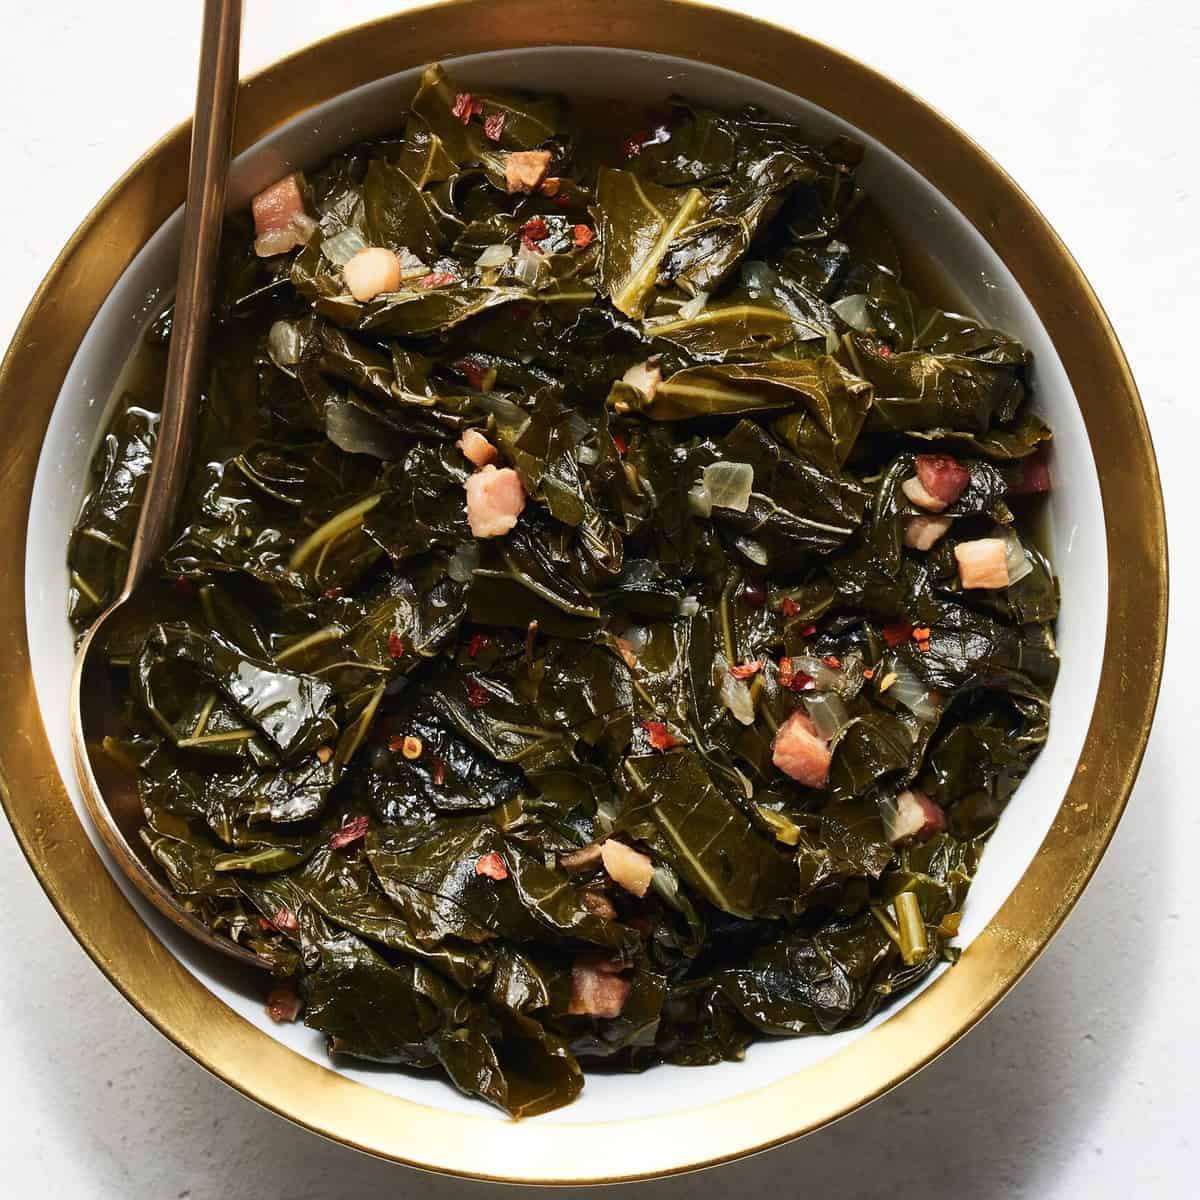  Collard greens are a classic southern dish, but this tangy twist will take it to a whole new level.